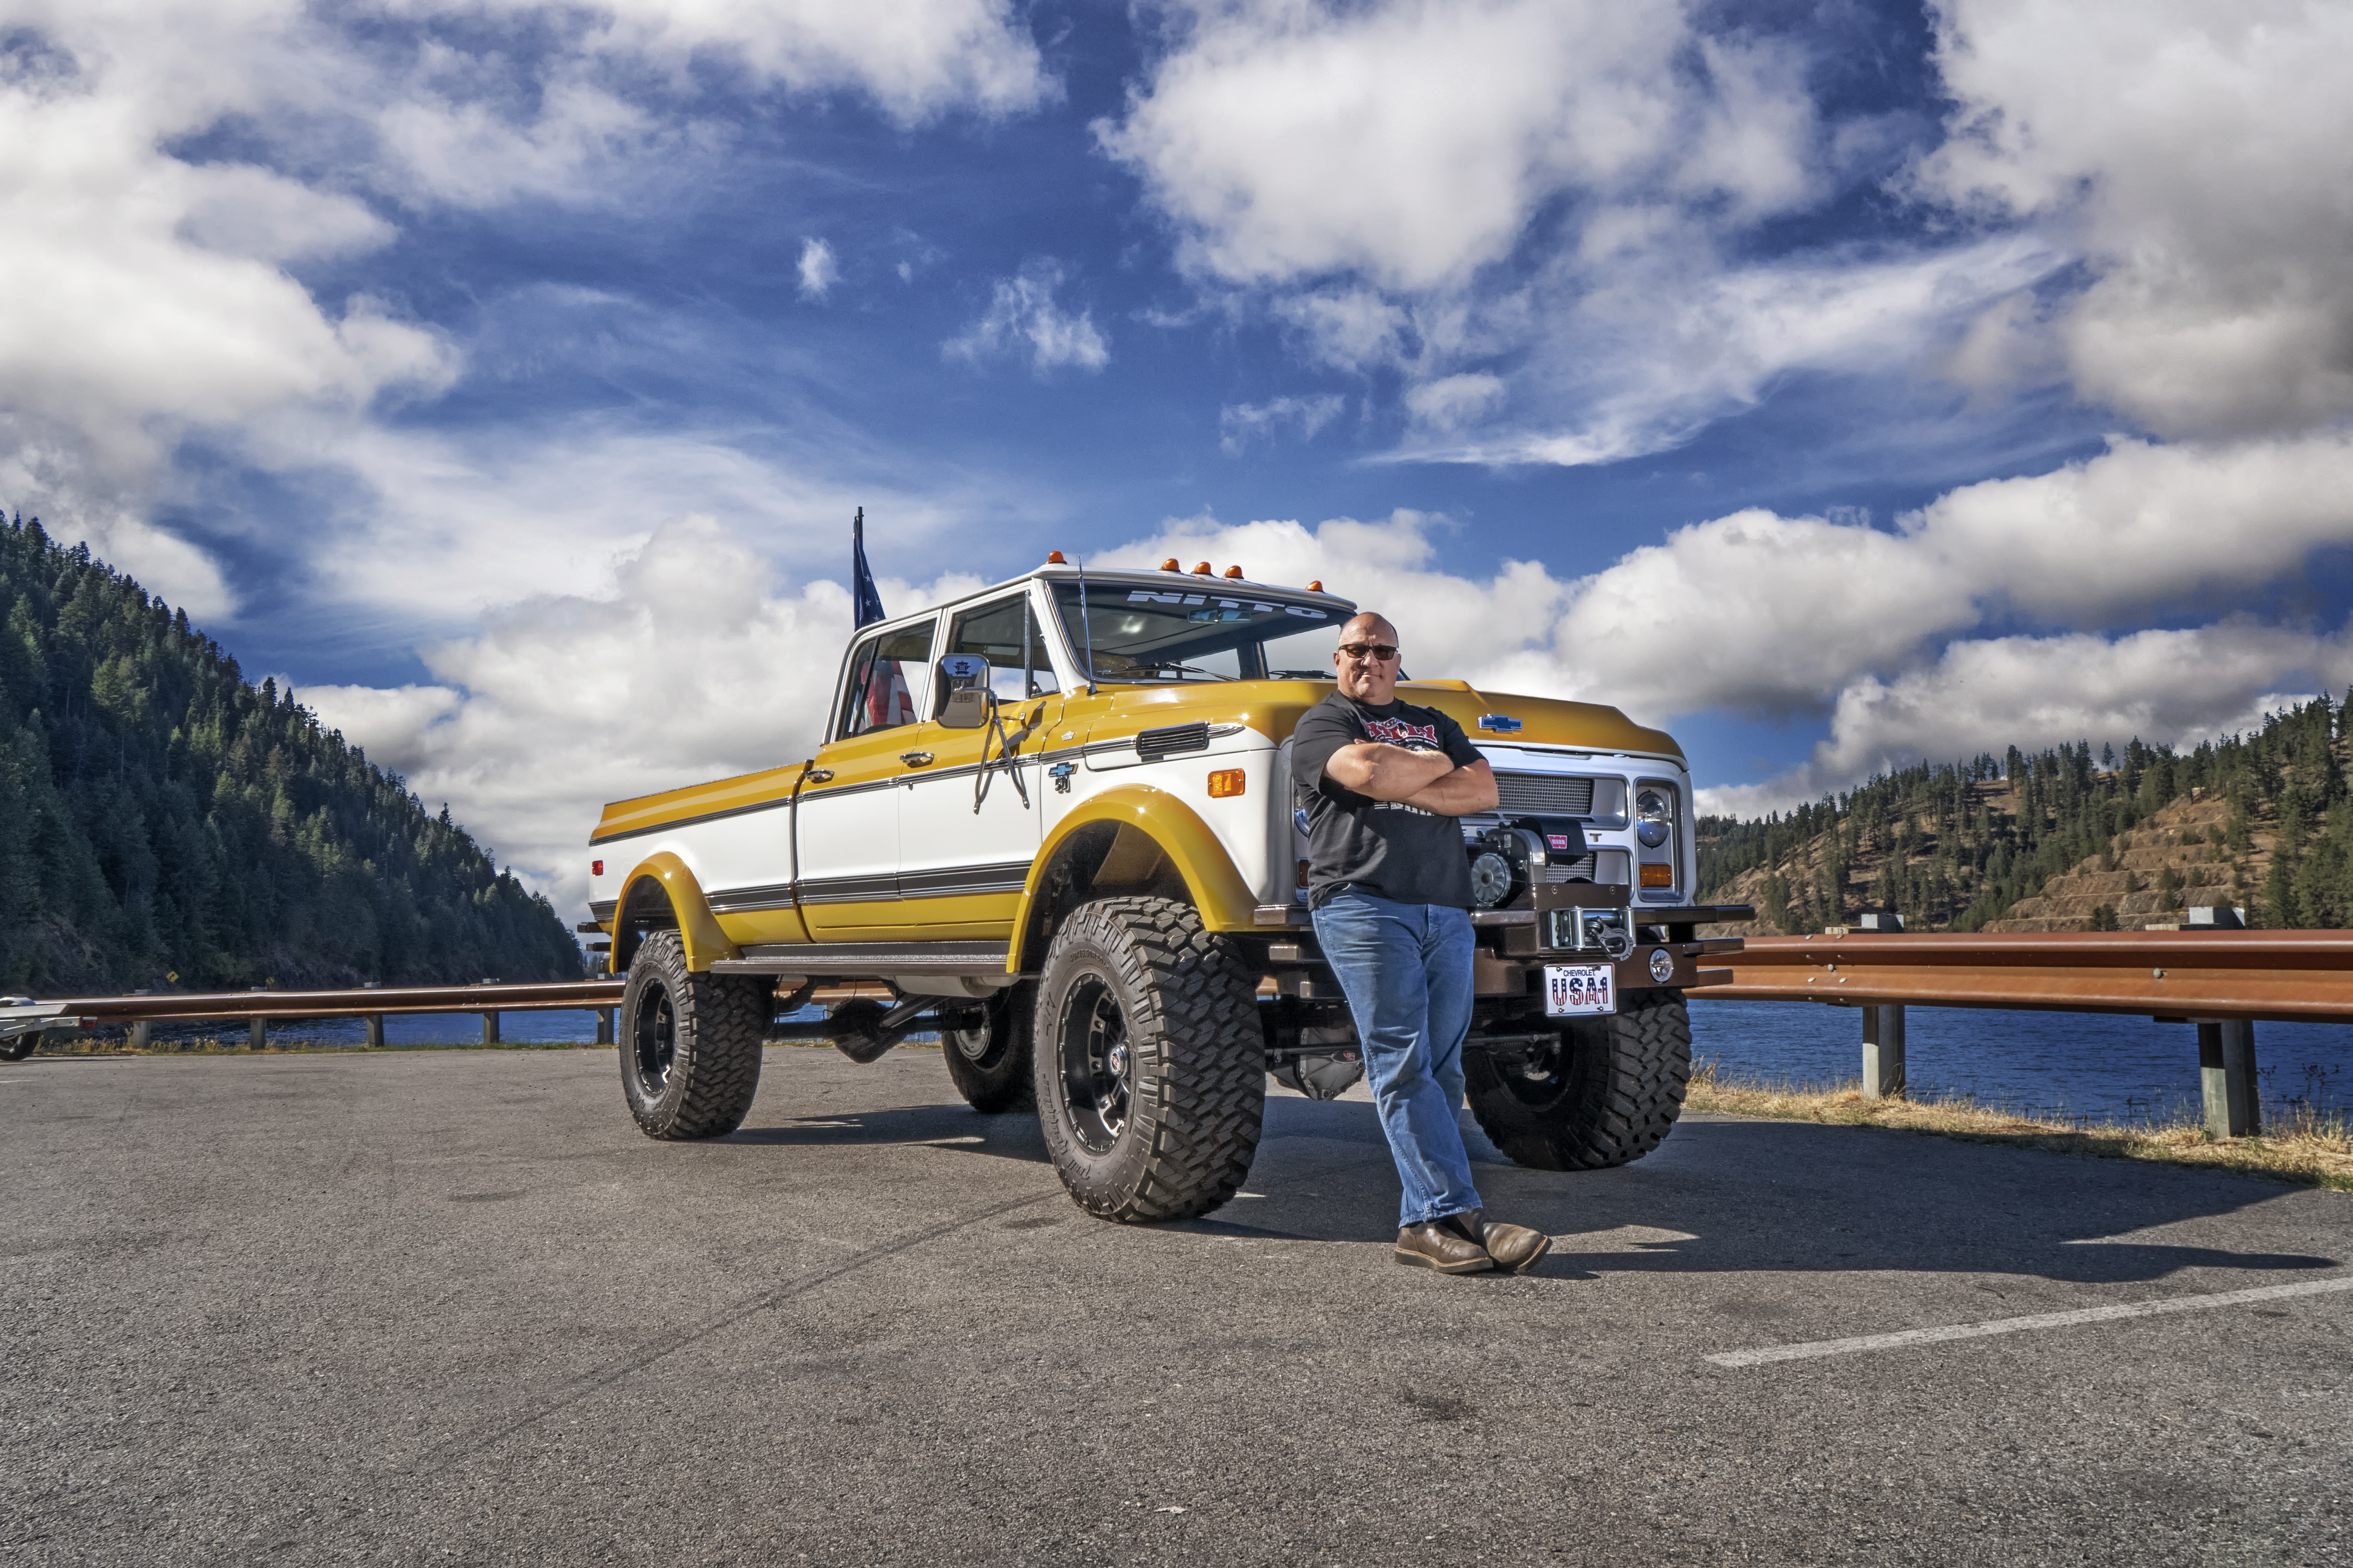 See How Rtech Fabrications Builds Trucks to do Truck Things